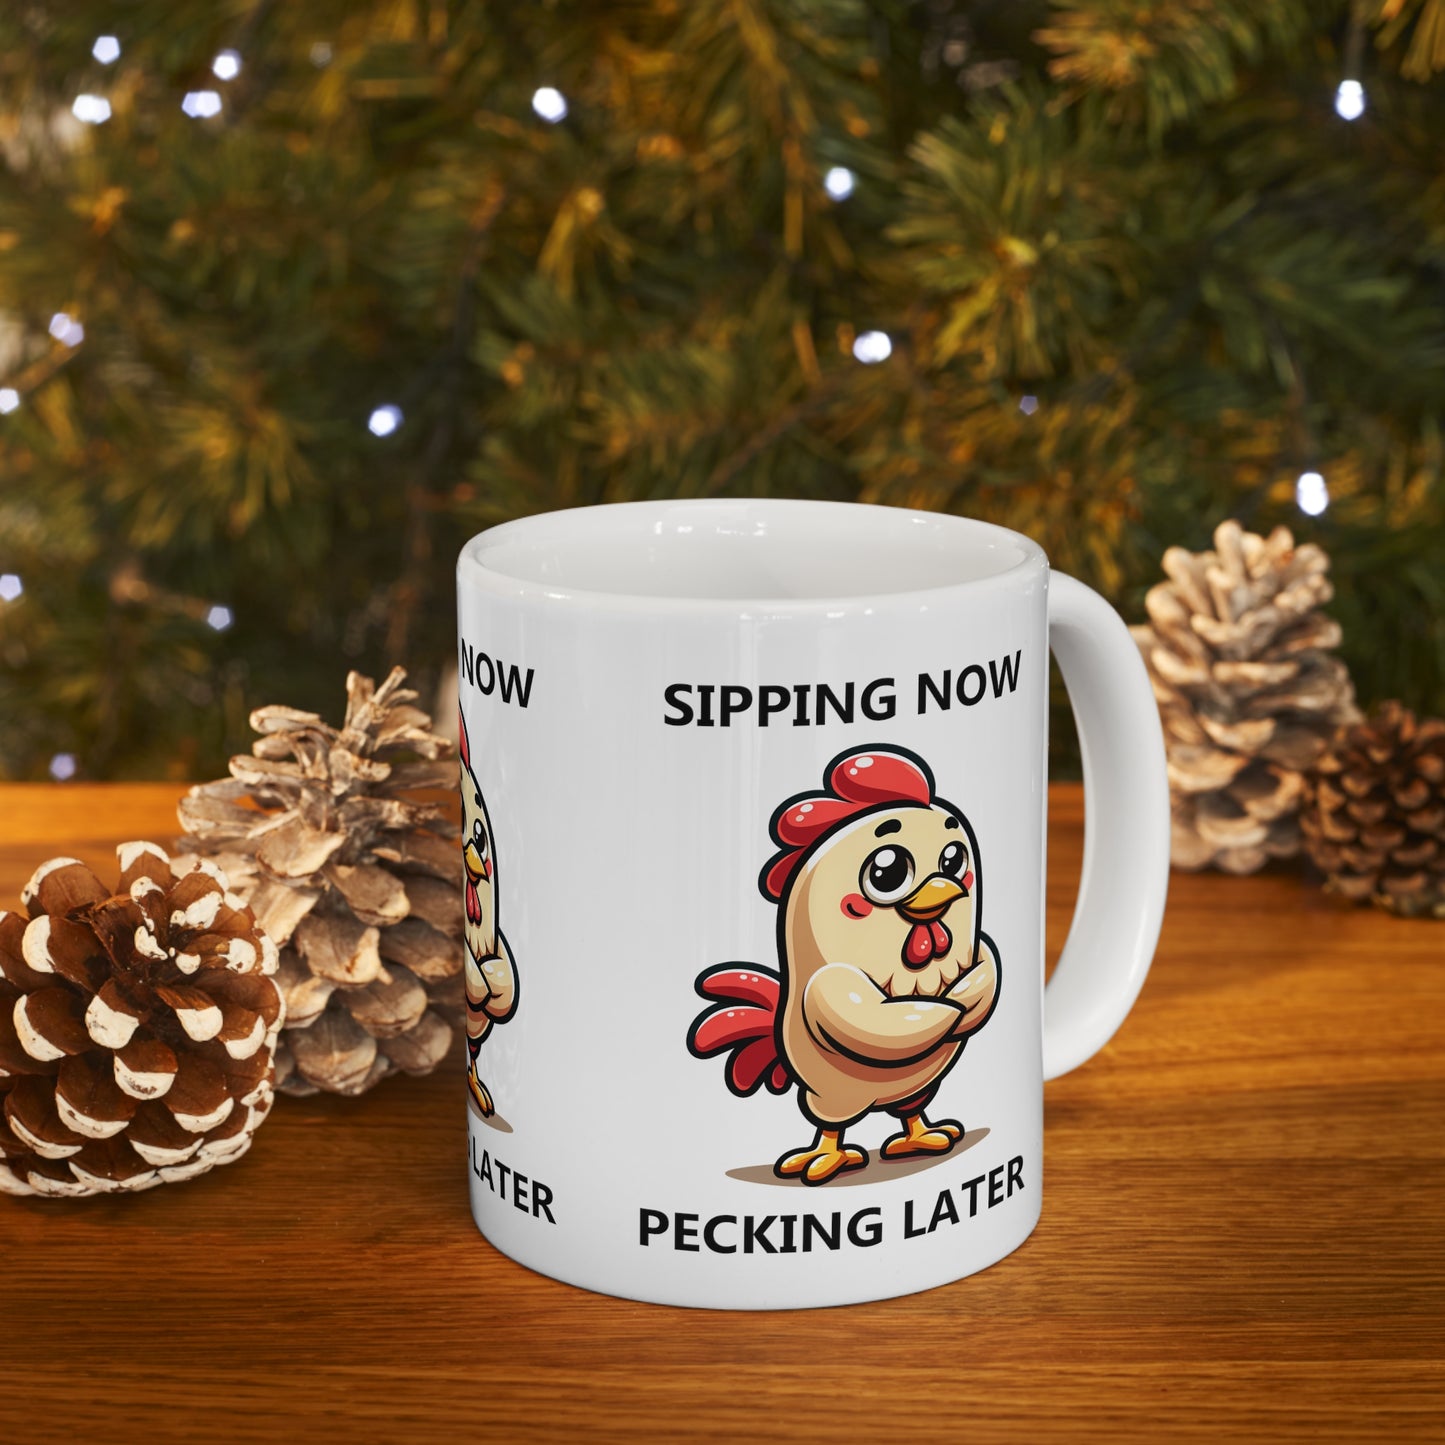 Funny Coffee Mug, Sipping Pecking Chicken Art Ceramic Cup Tea Office Boss Coworker Friend Unique Microwave Safe Novelty Cool Gift